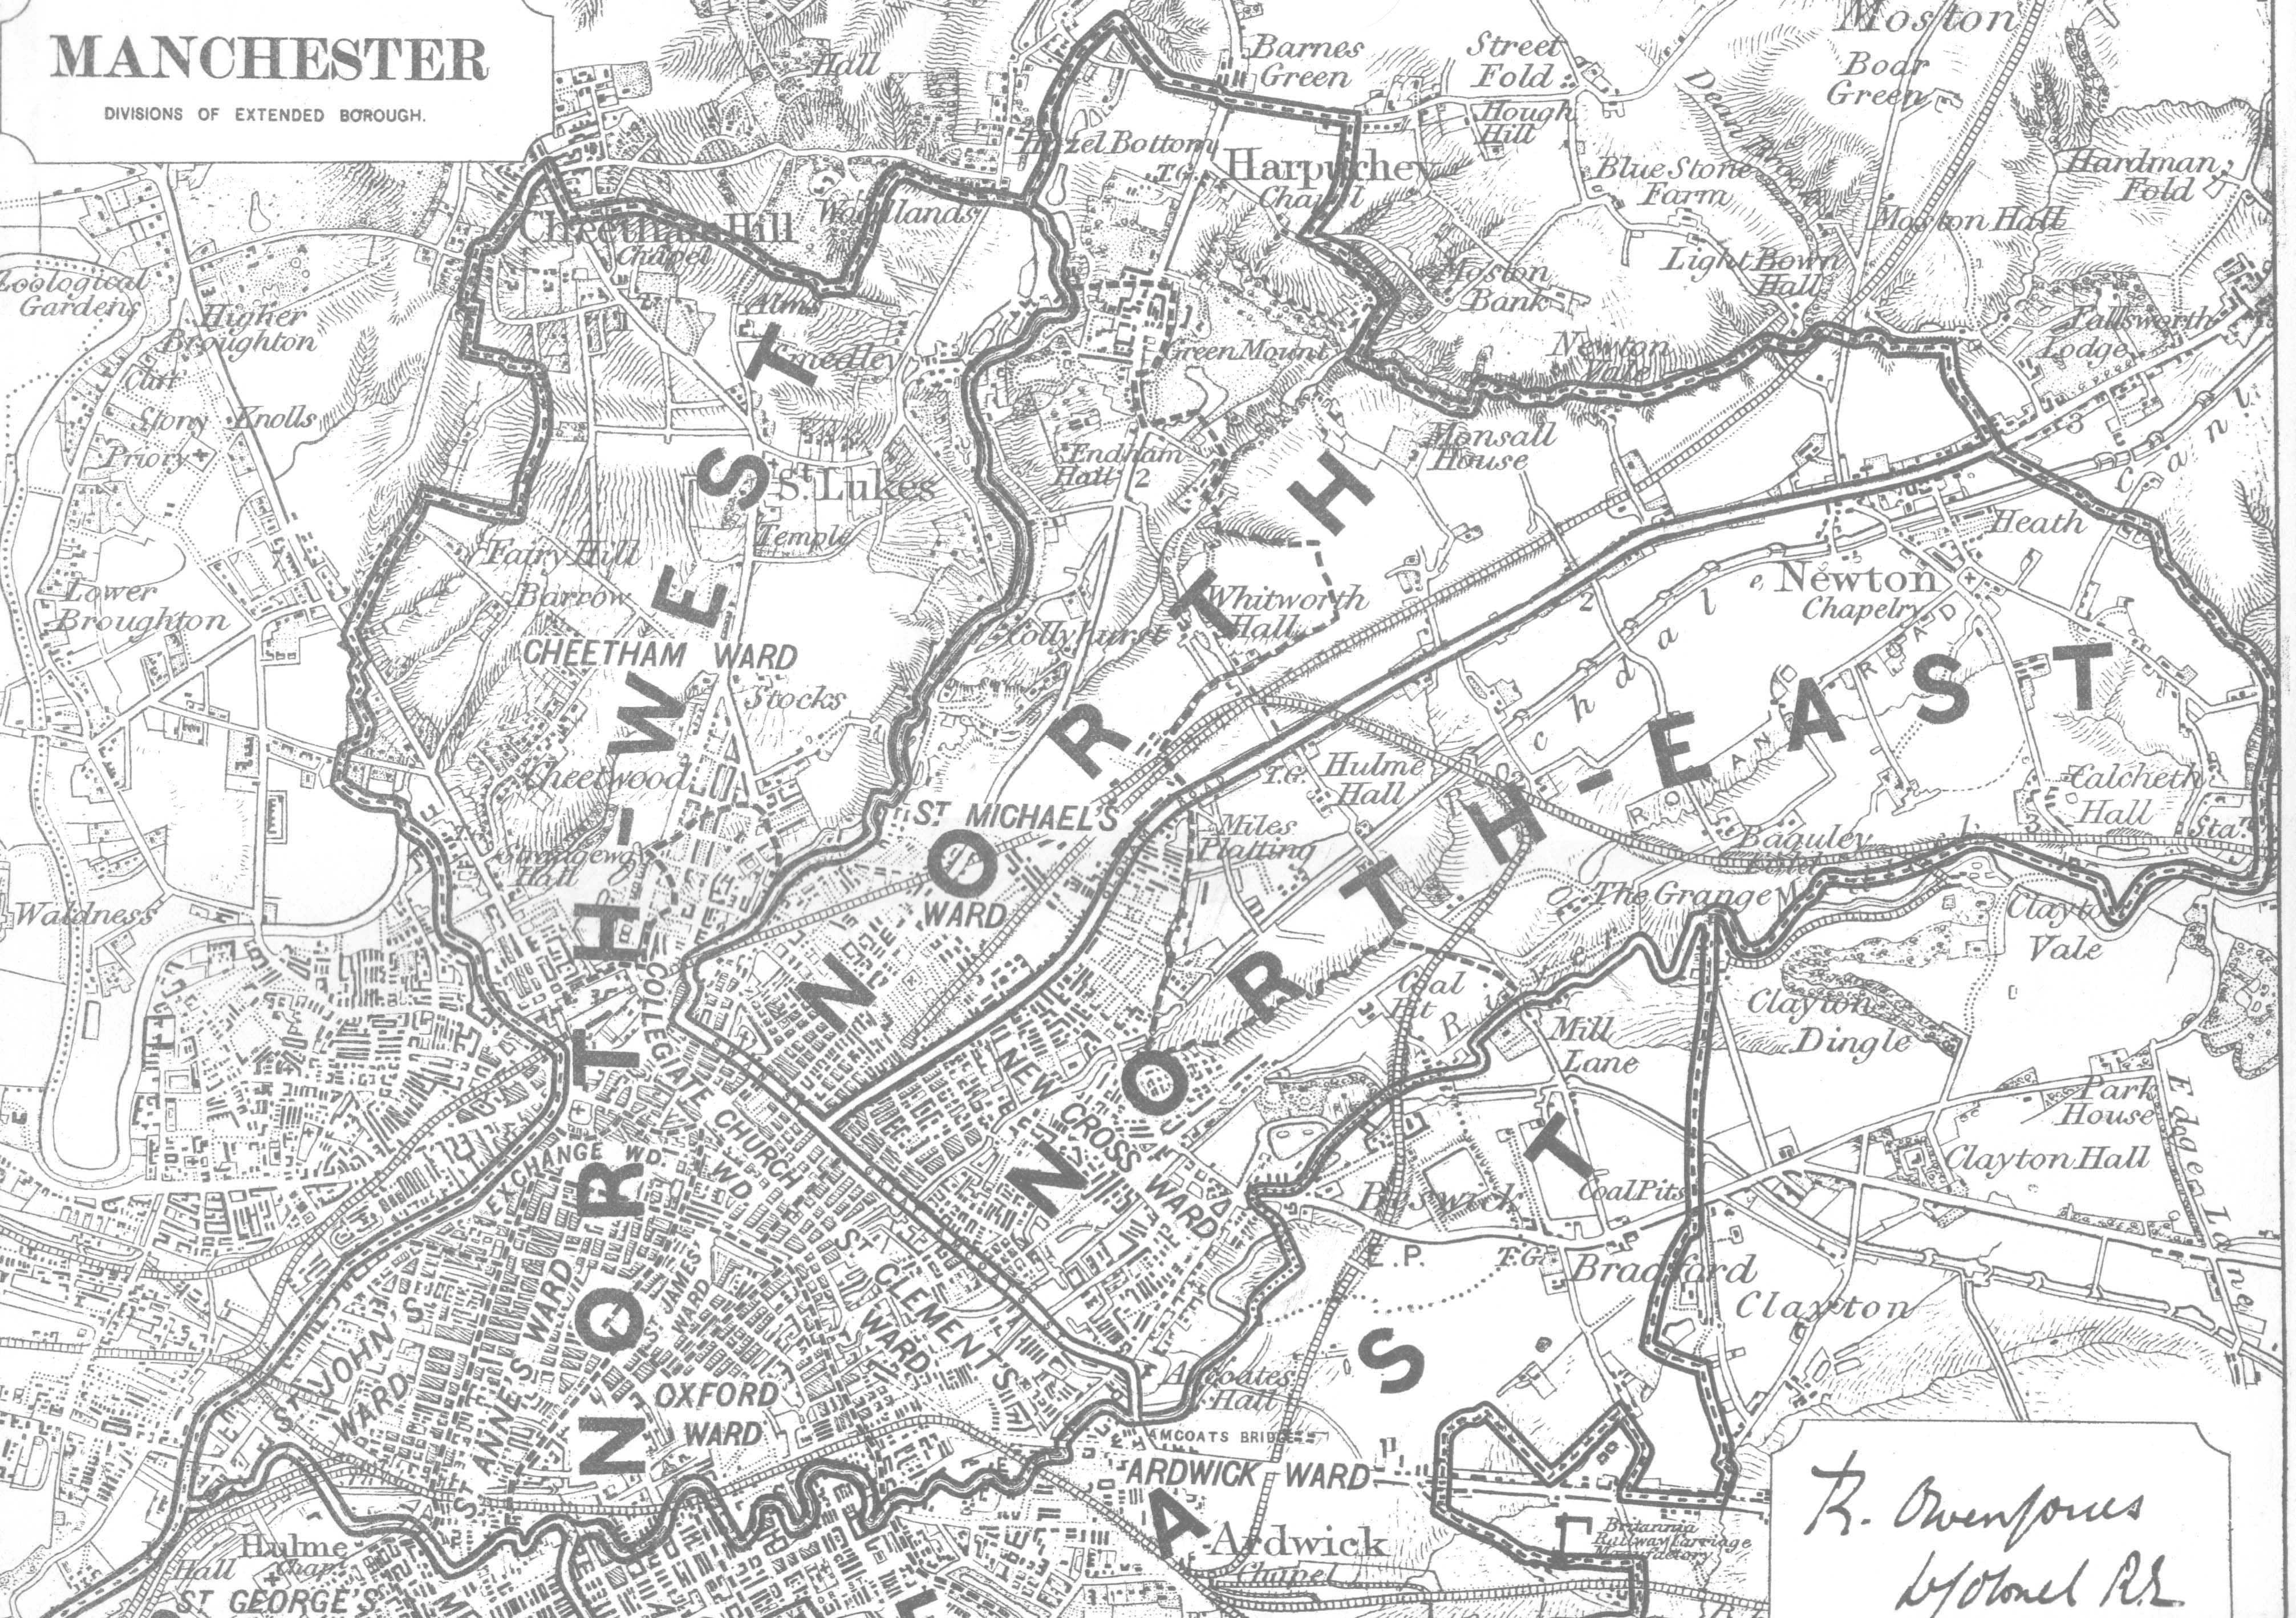 Map of the Borough of Manchester, published 1885